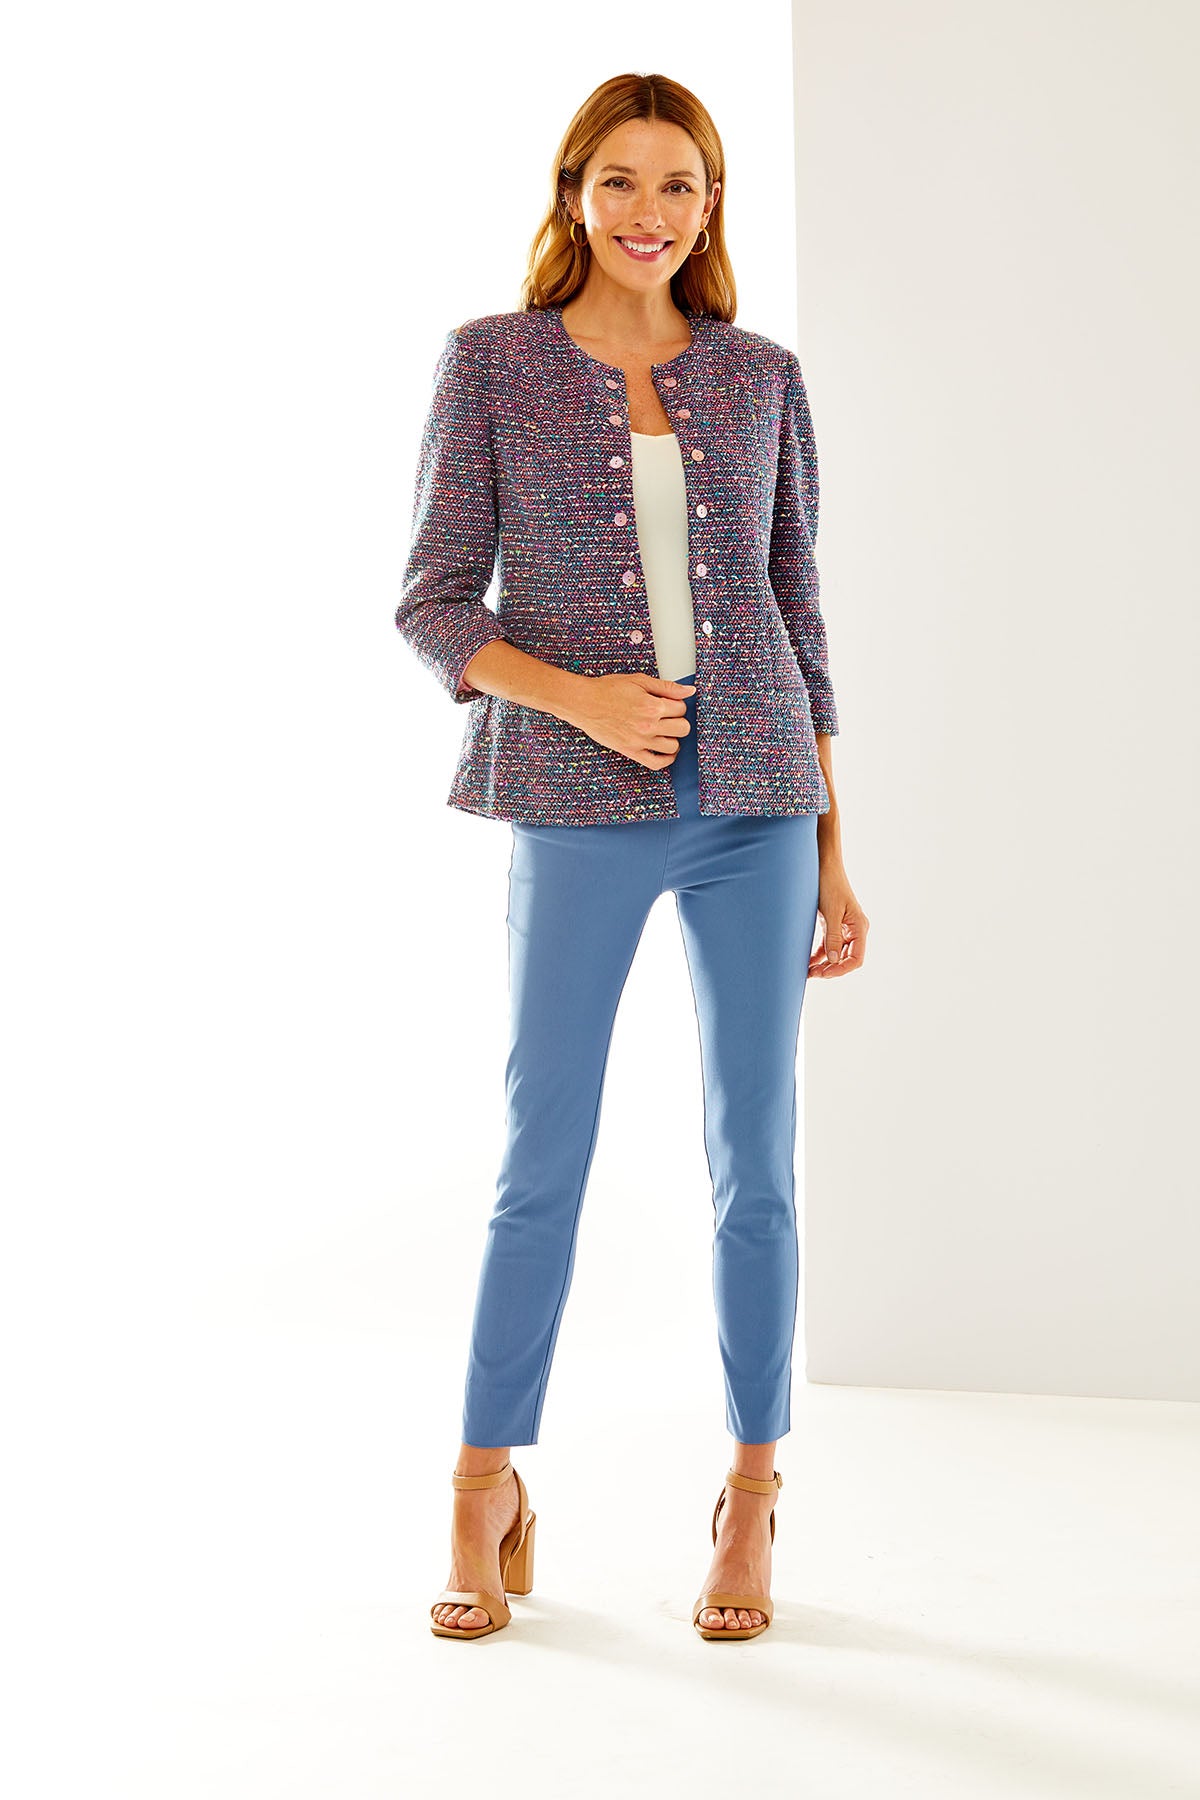 The best-selling Sara Campbell Sheri Pants in steel blue